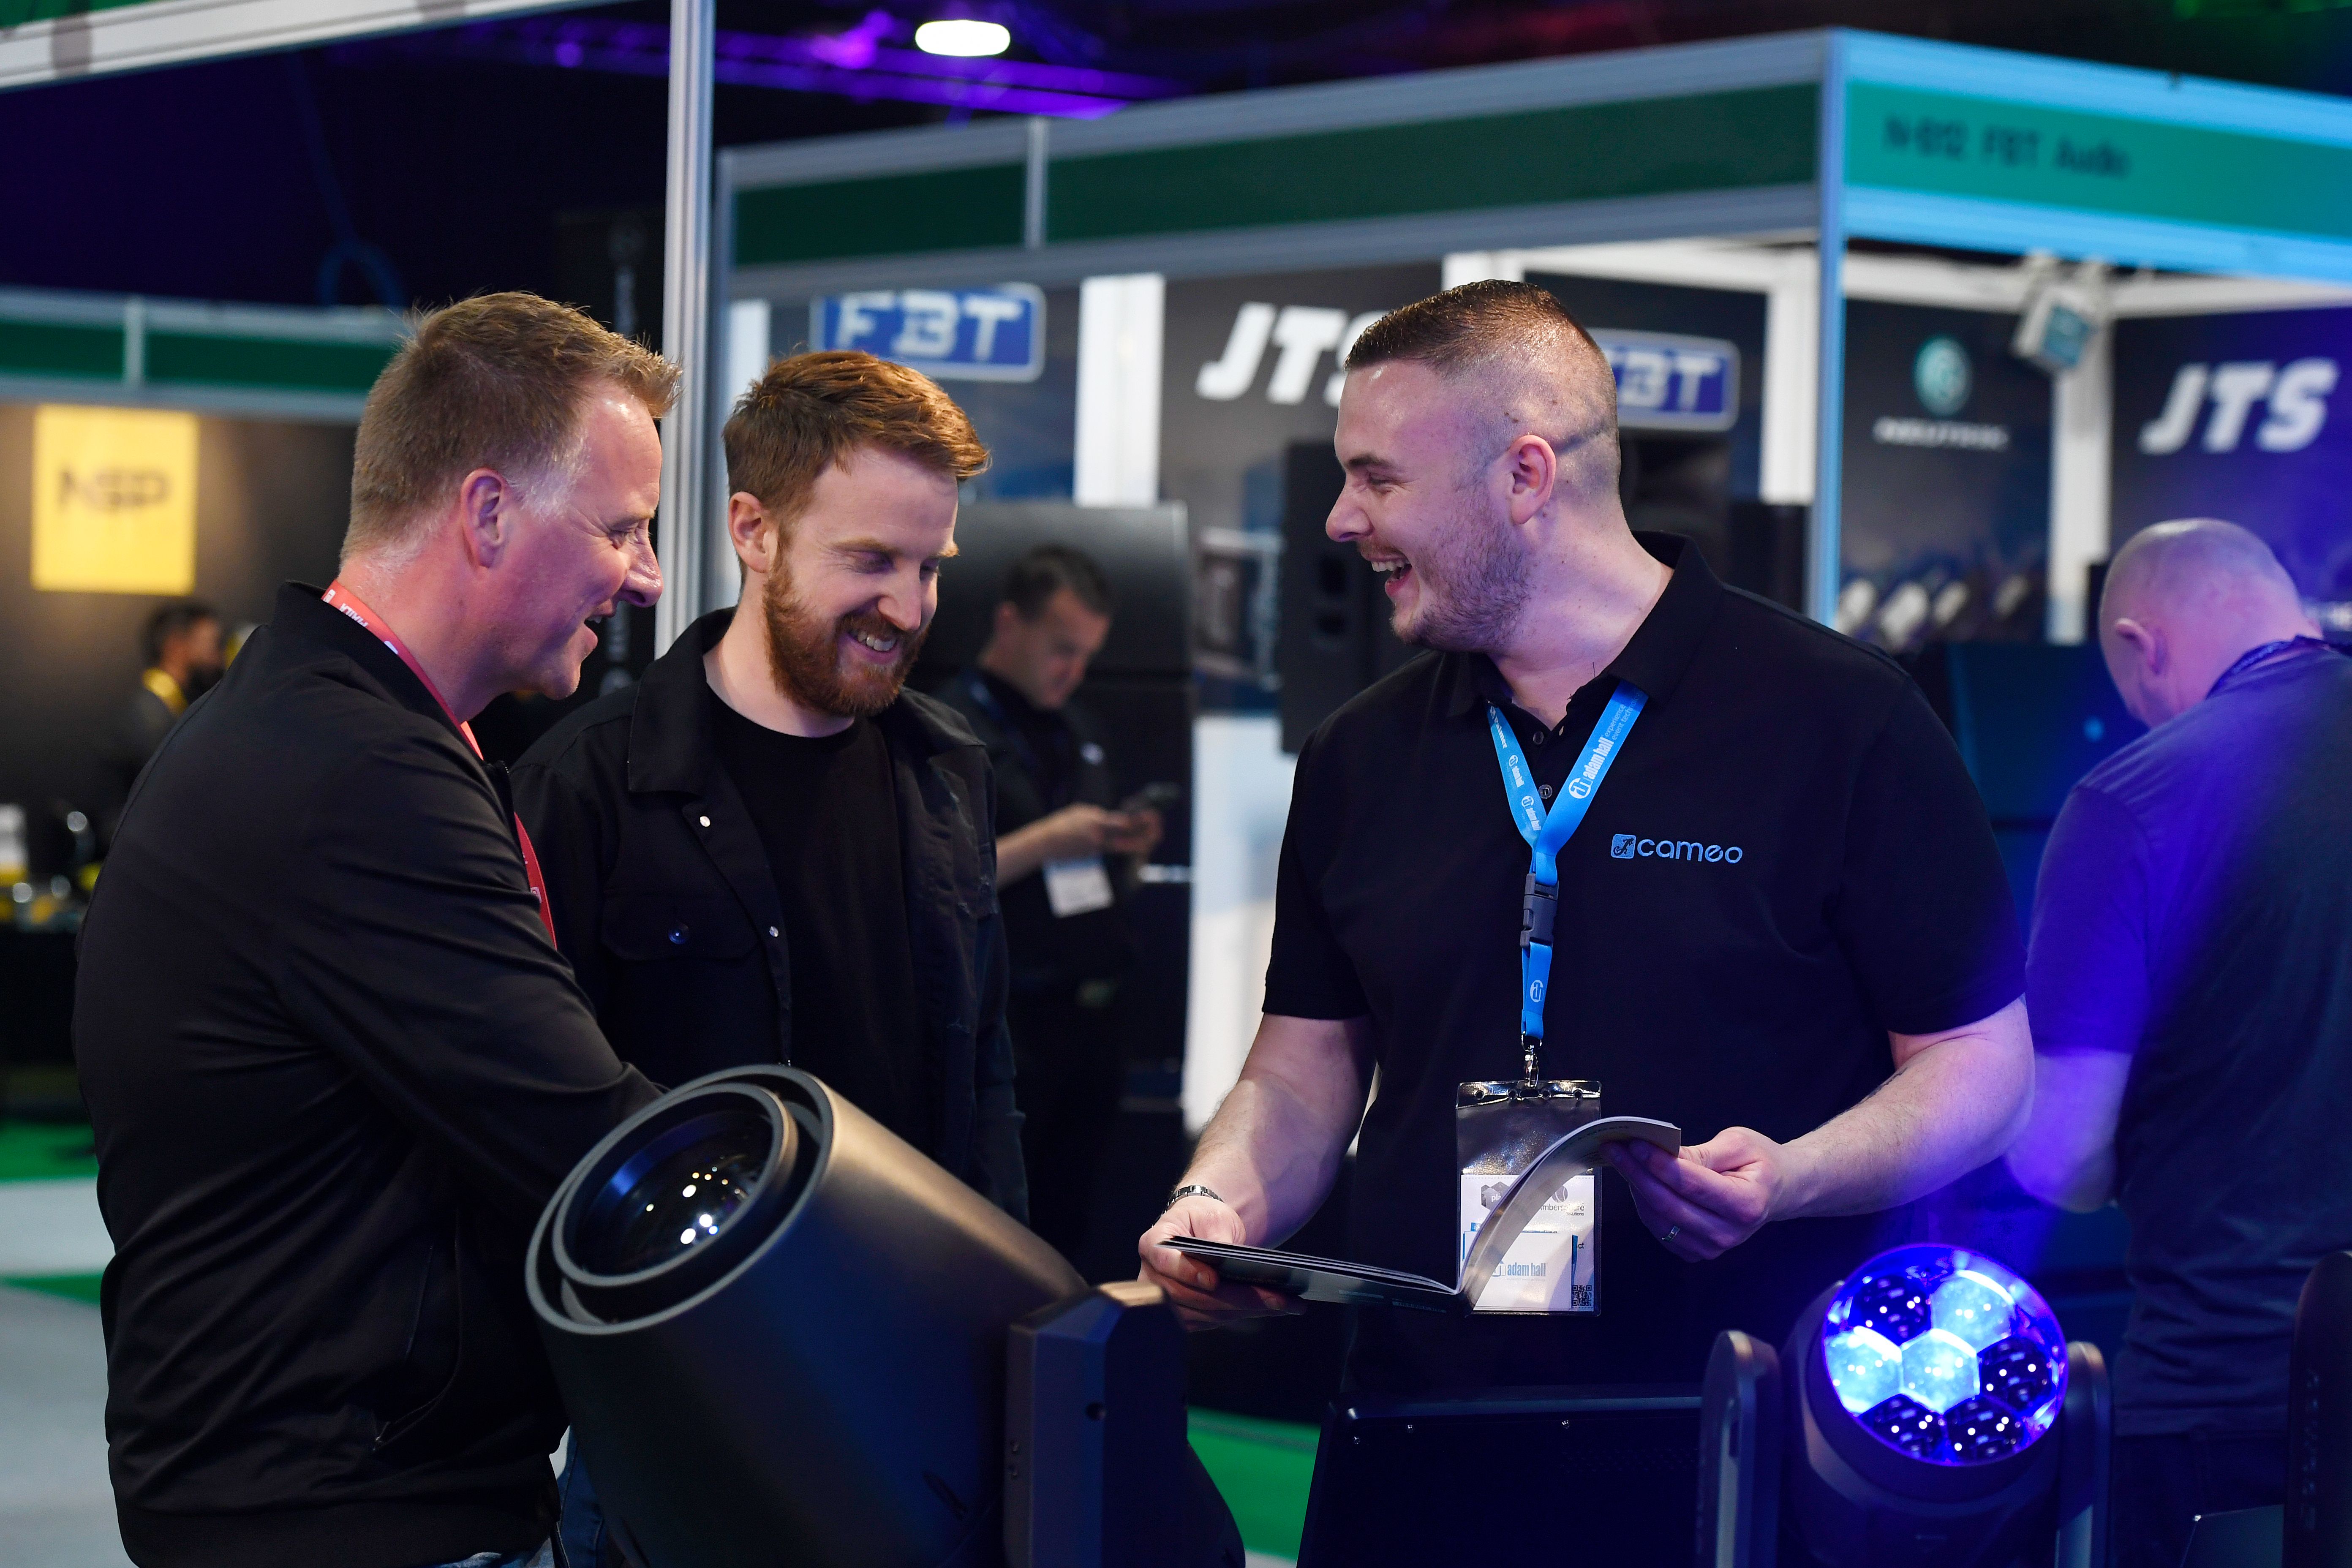 Visitors laughing with Cameo Lighting employee at entertainment technology trade show in Leeds UK